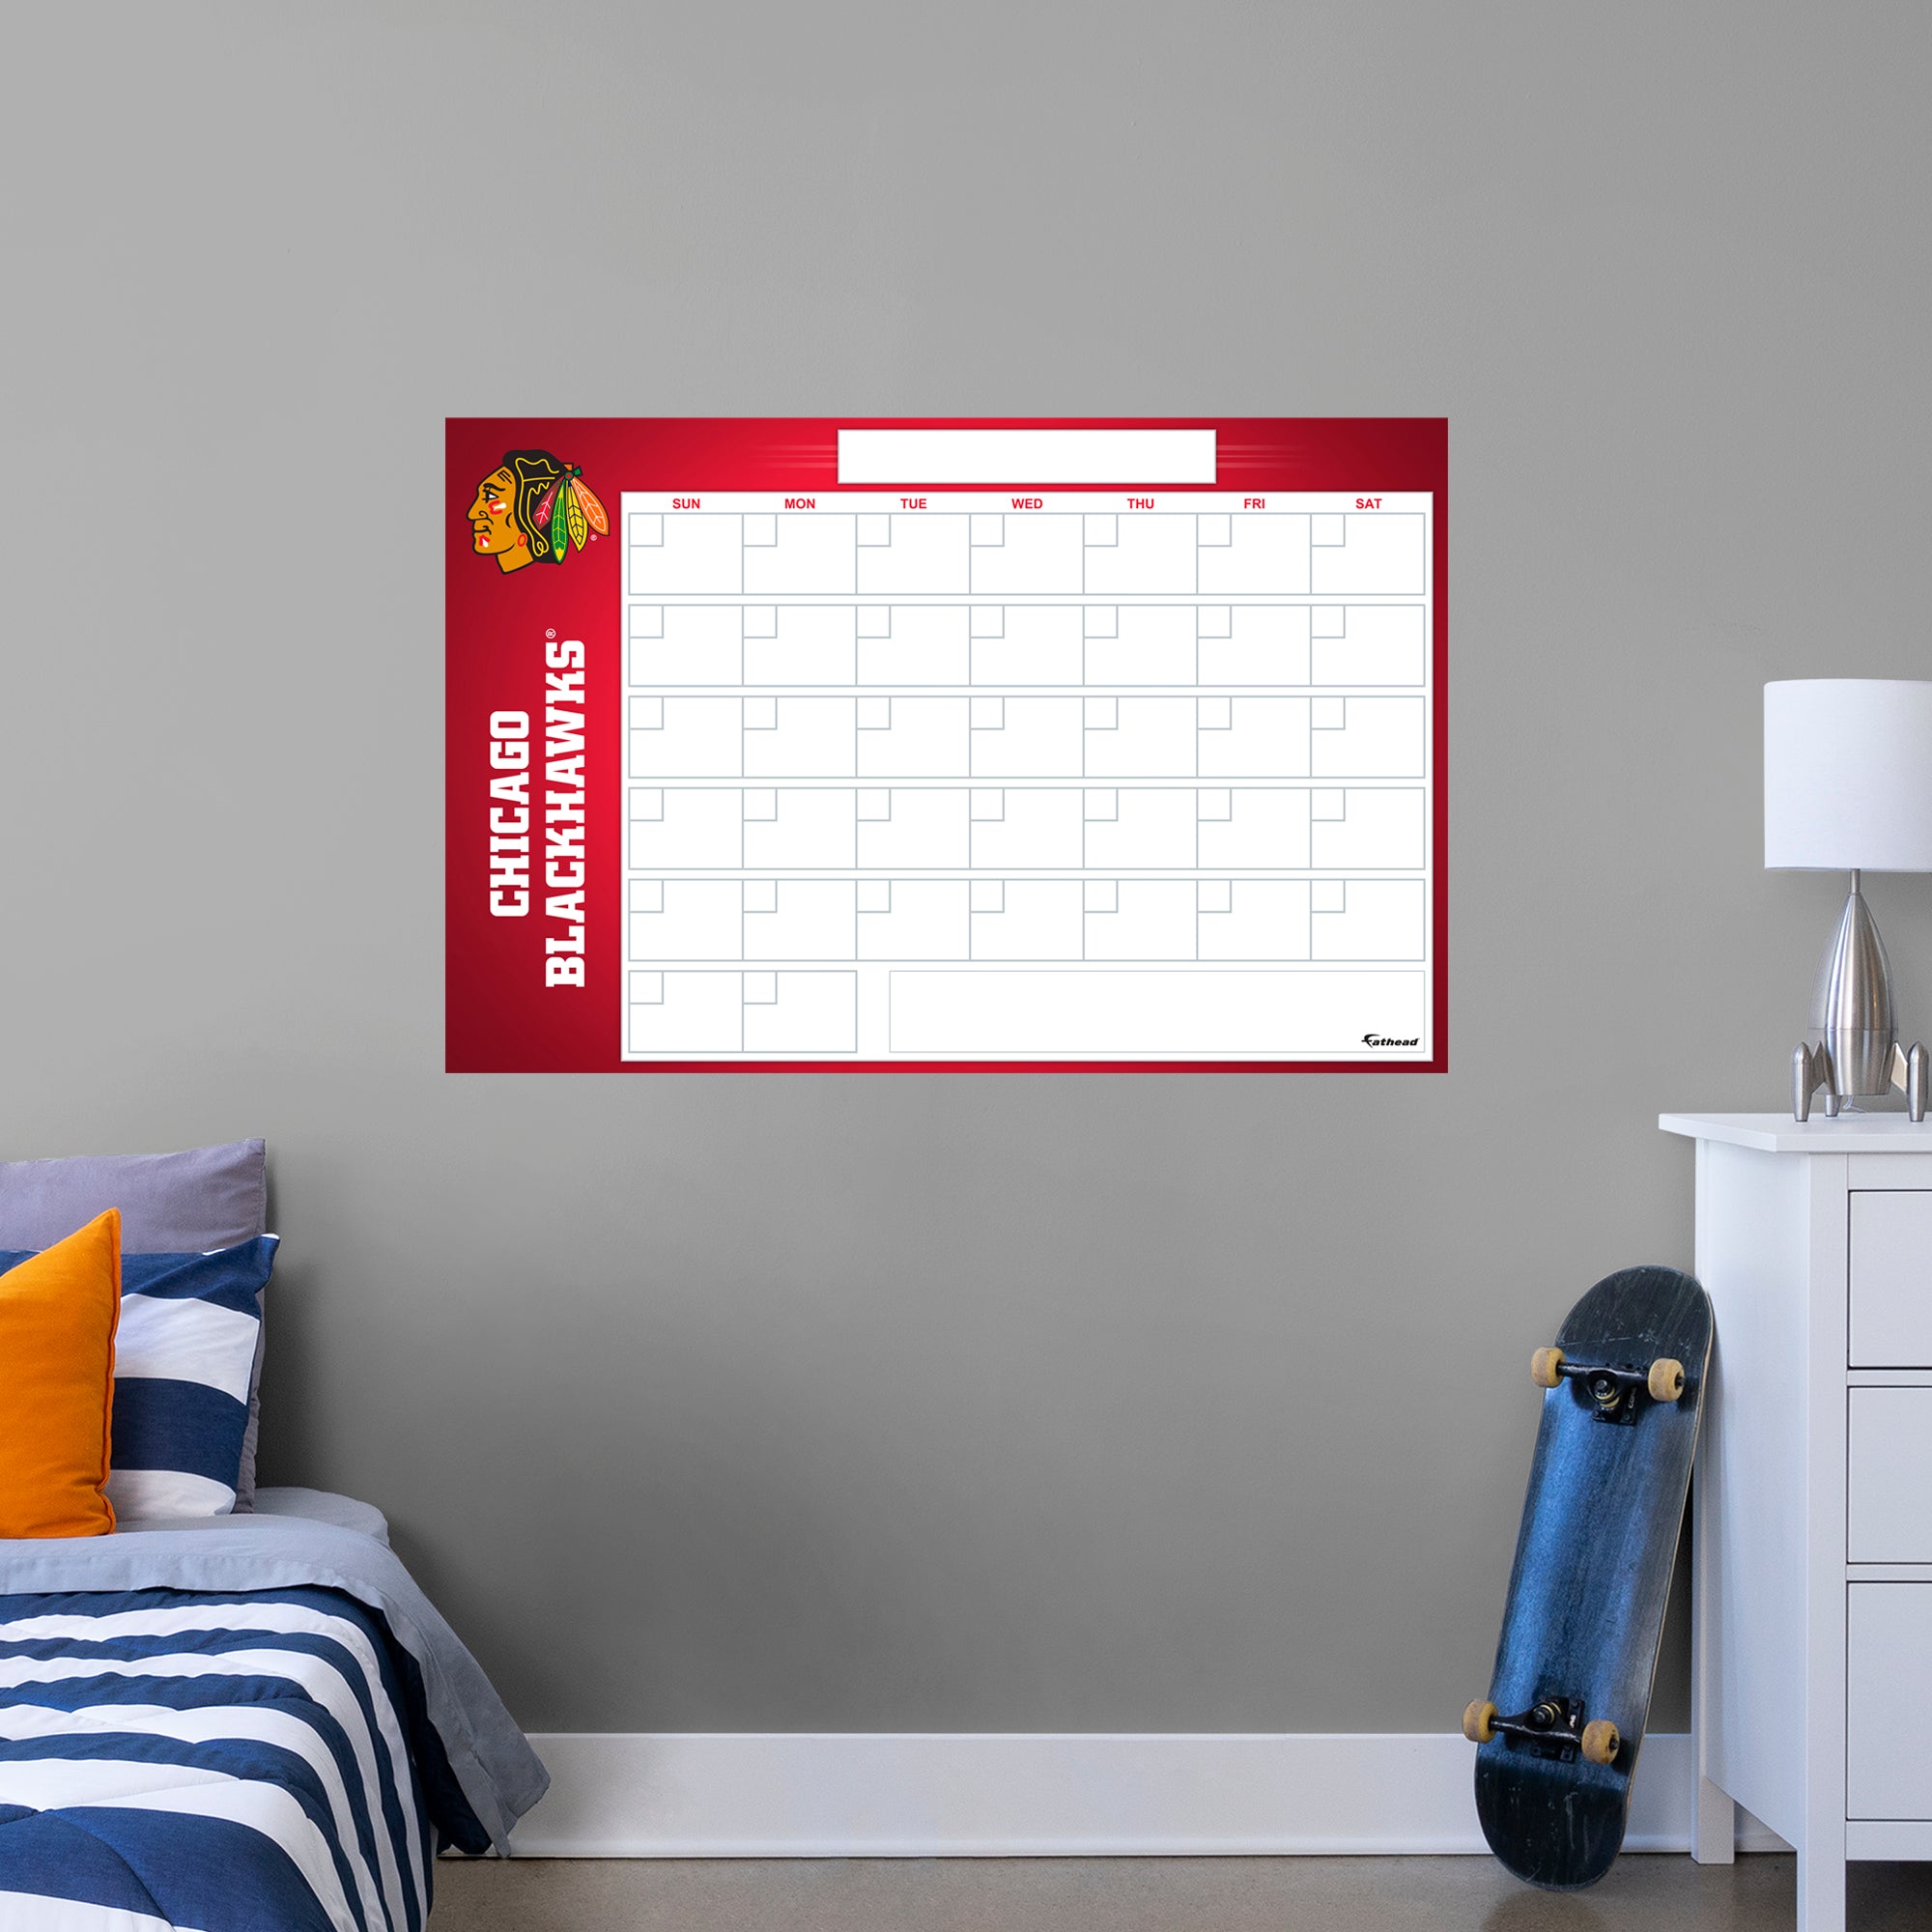 Chicago Blackhawks Dry Erase Calendar - Officially Licensed NHL Removable Wall Decal Giant Decal (57"W x 34"H) by Fathead | Viny